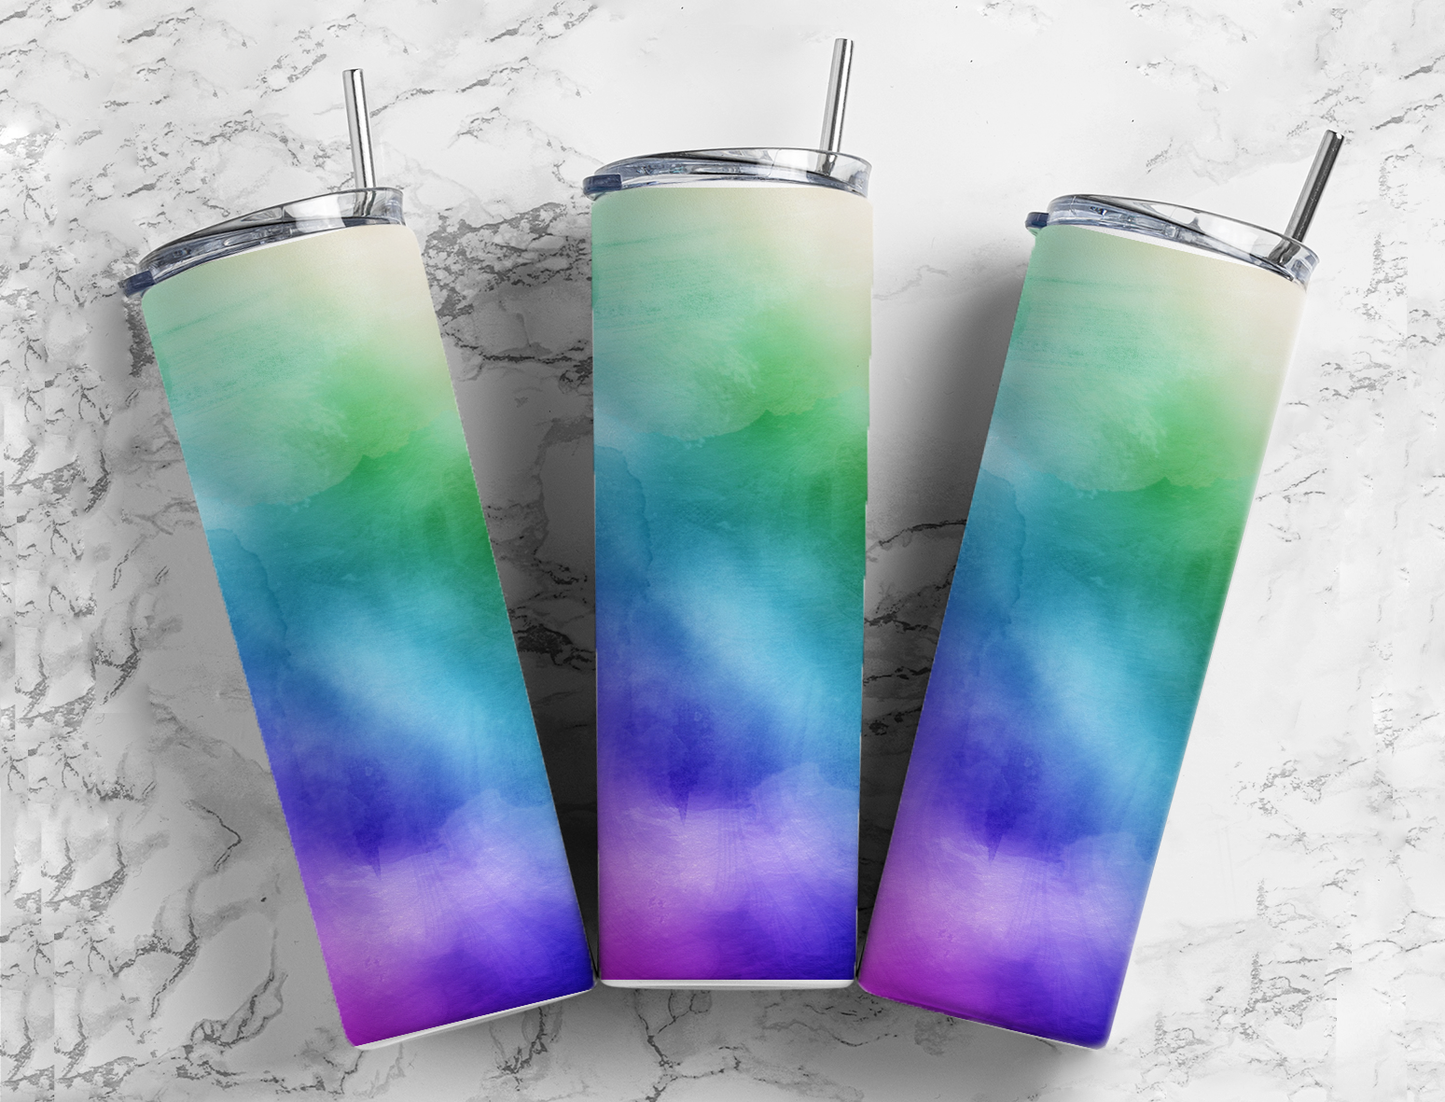 Blue, Green and Purple Tie Dye 20oz Insulated Tumblers, Gift Idea For The Tie Dye Obsessed